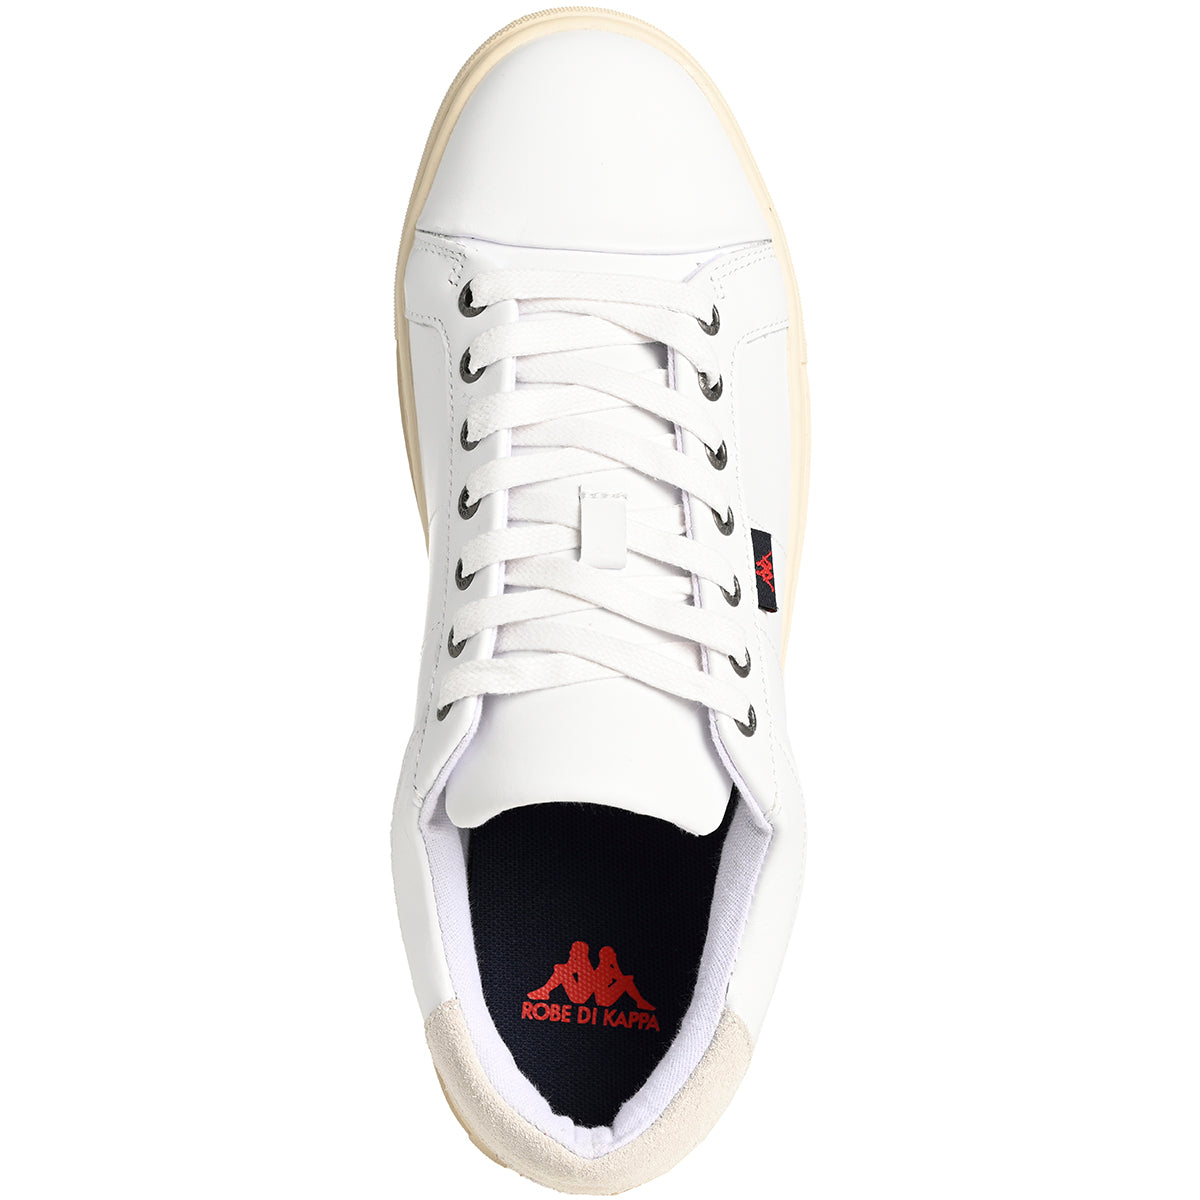 Chaussures lifestyle Derby Robe di Kappa blanc unisexe - Image 4